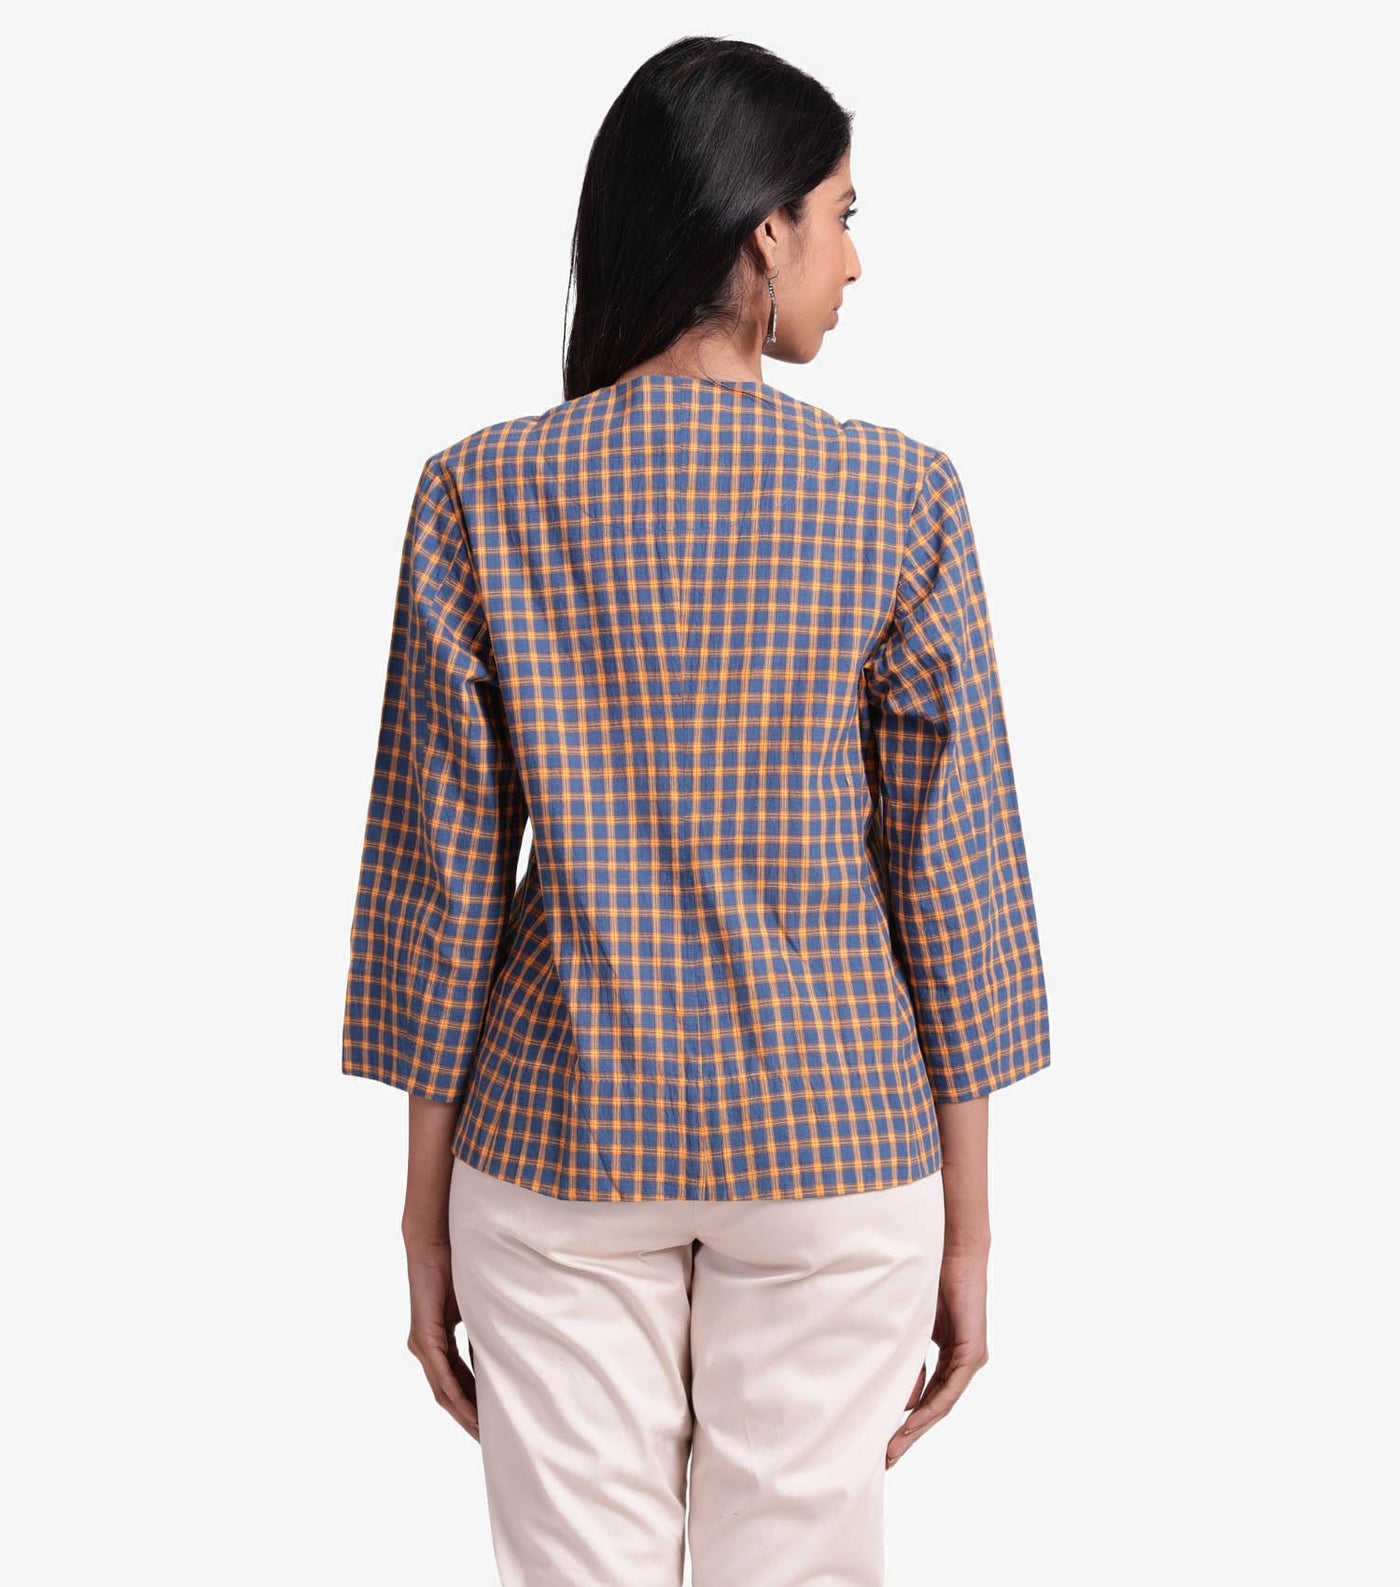 Checked cotton short jacket